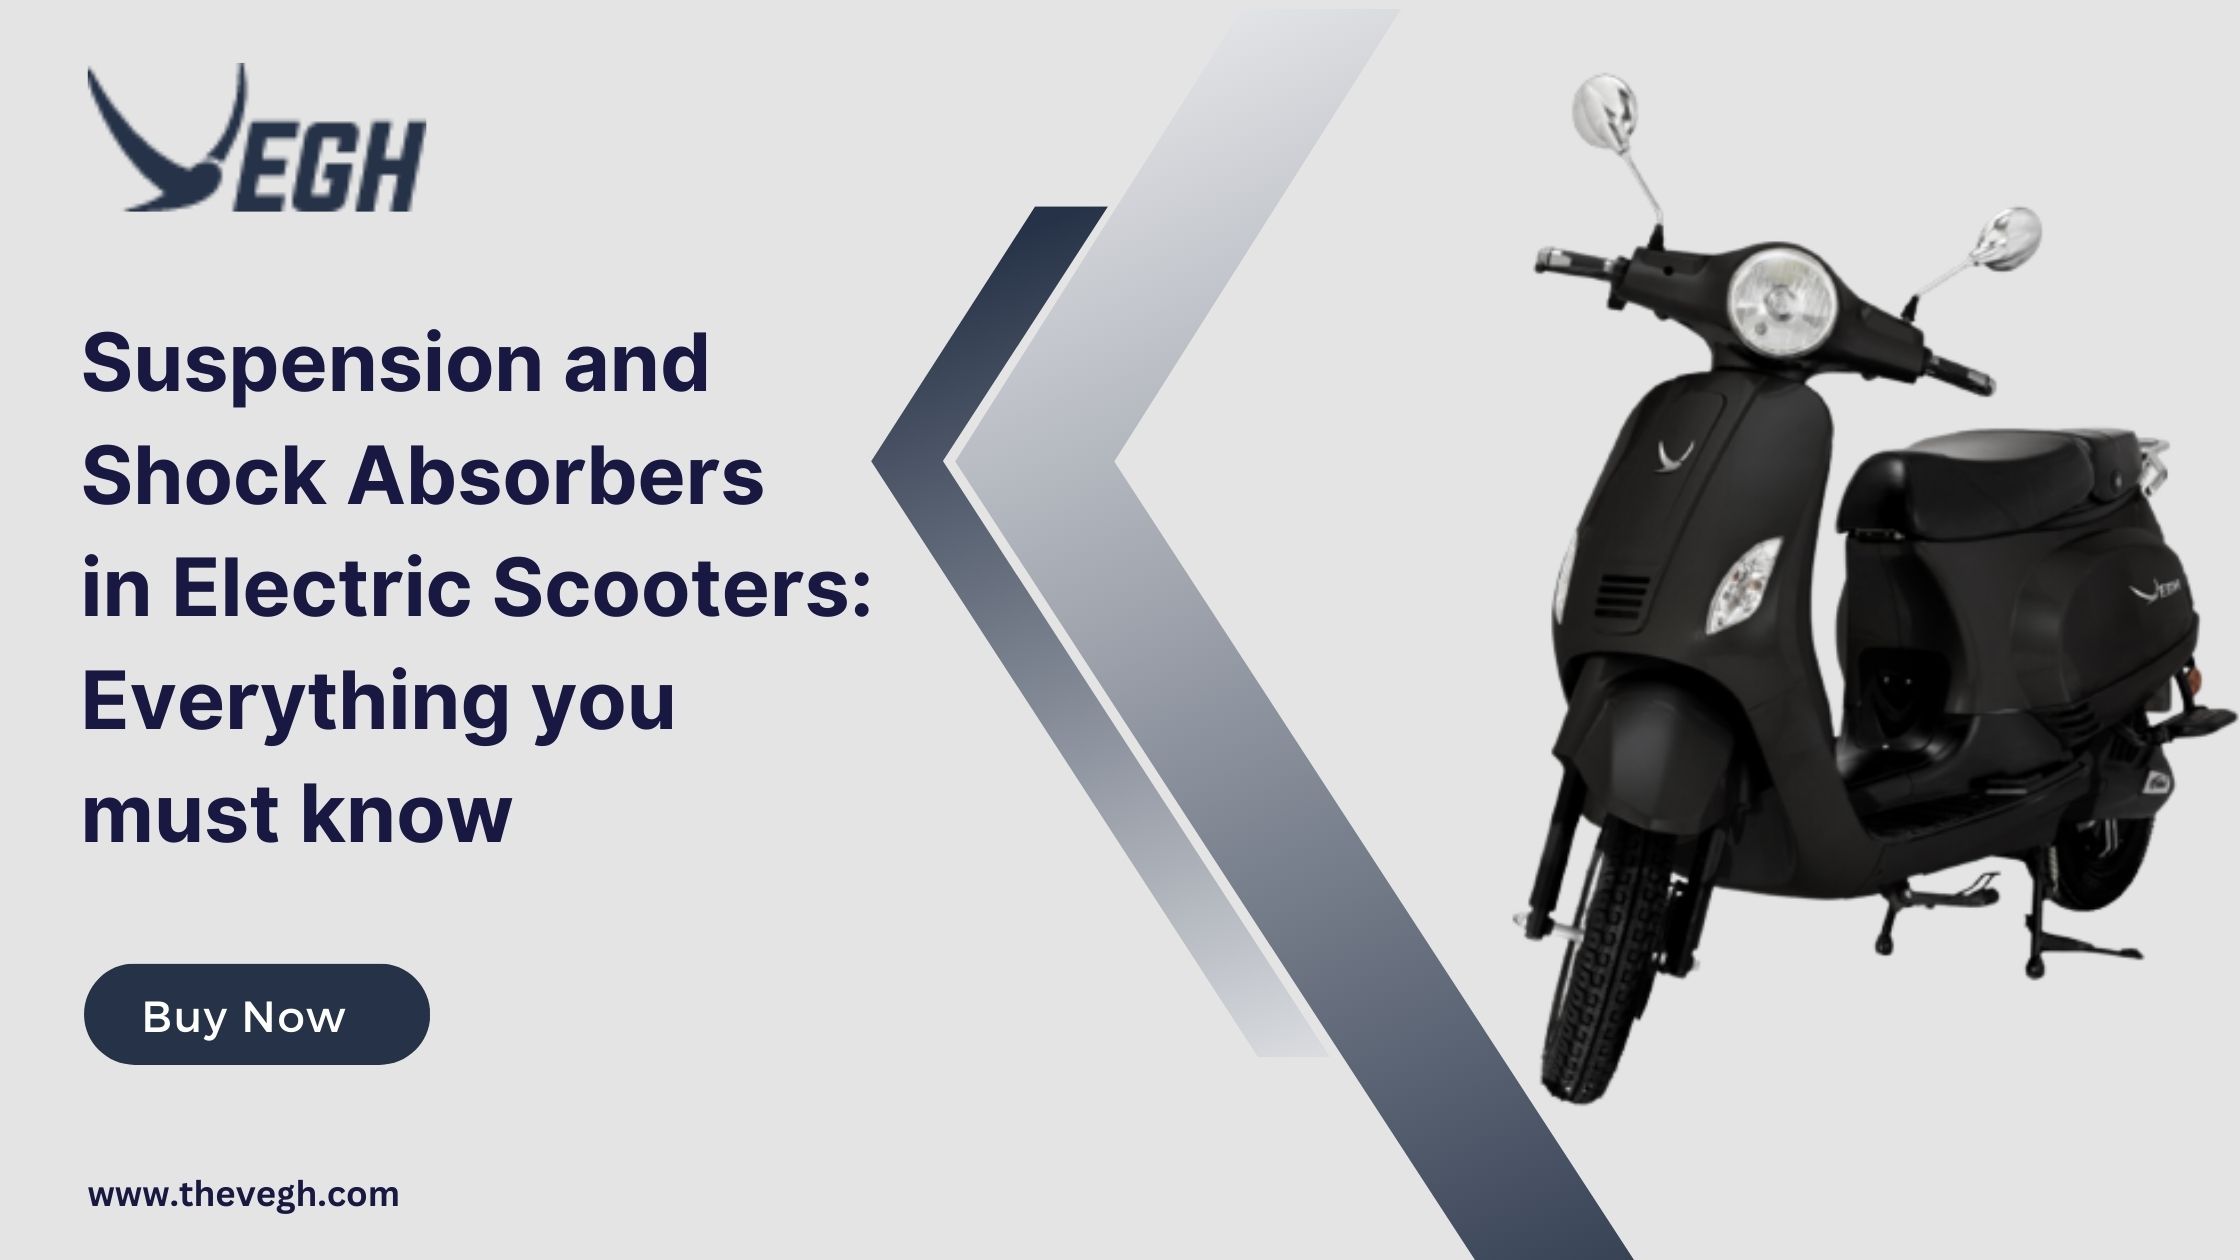 Suspension and Shock Absorbers in Electric Scooters: Everything you must know